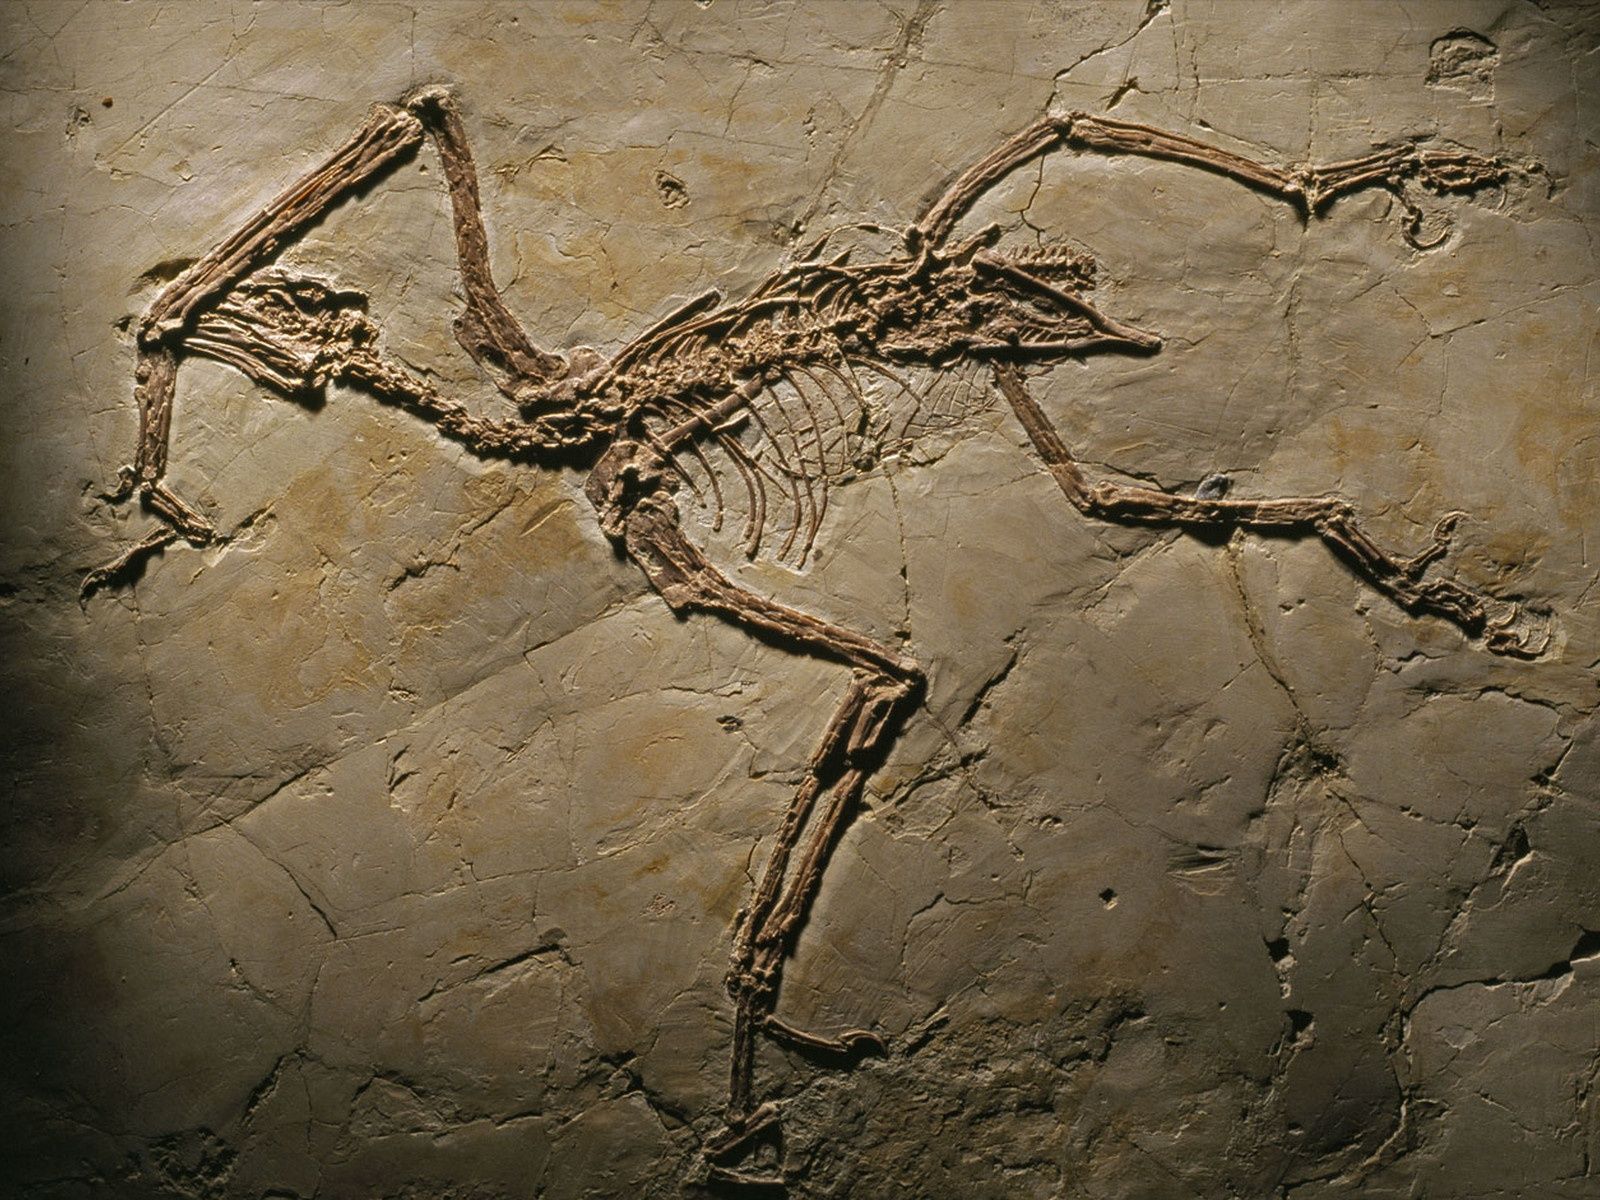 Sapeornis Chaoyangensis